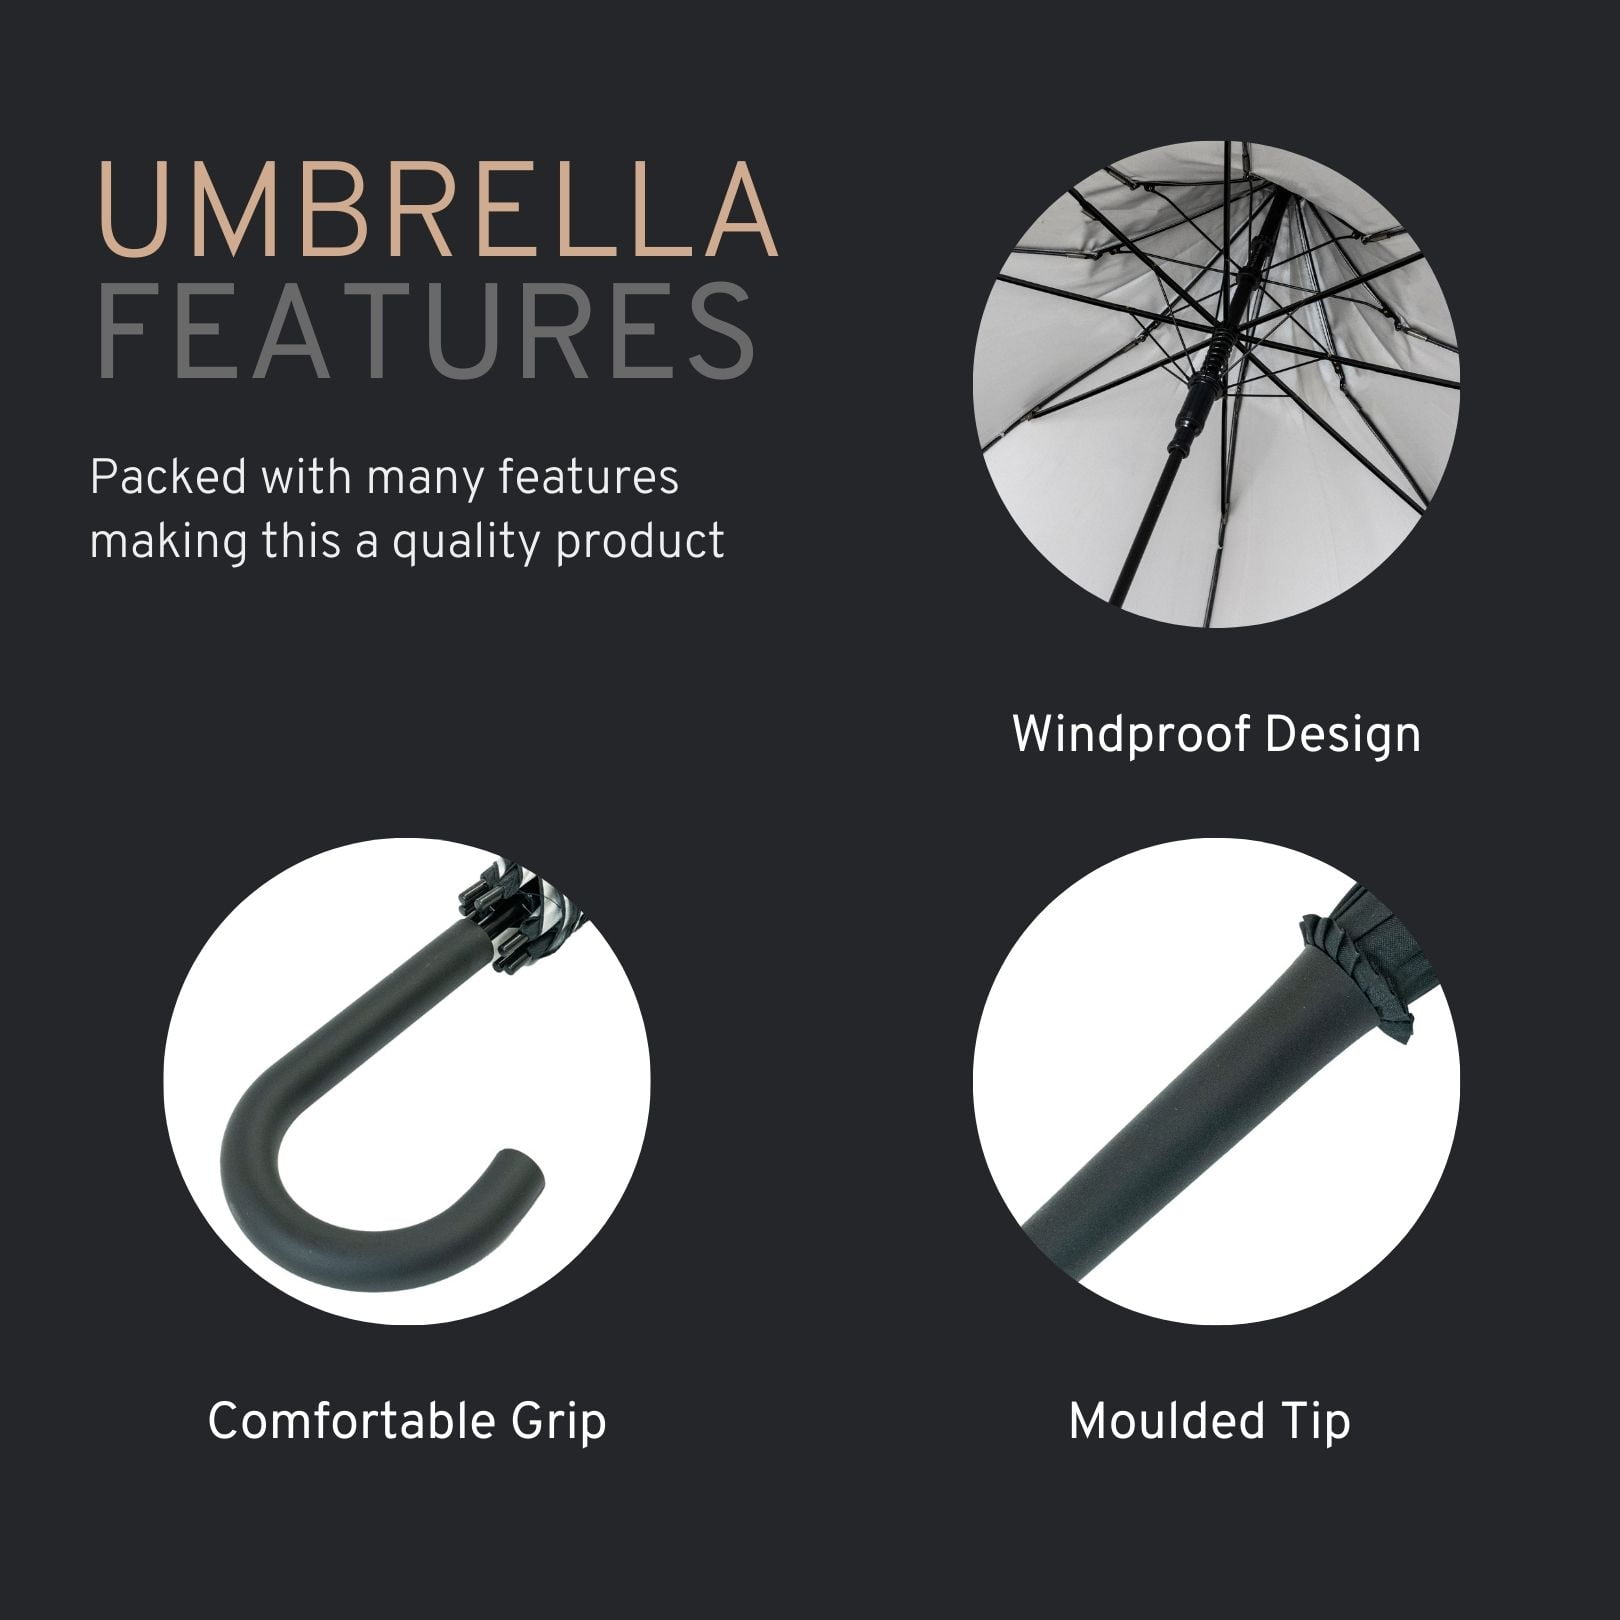 Infographic showing features of Classic Black Pagoda Umbrella